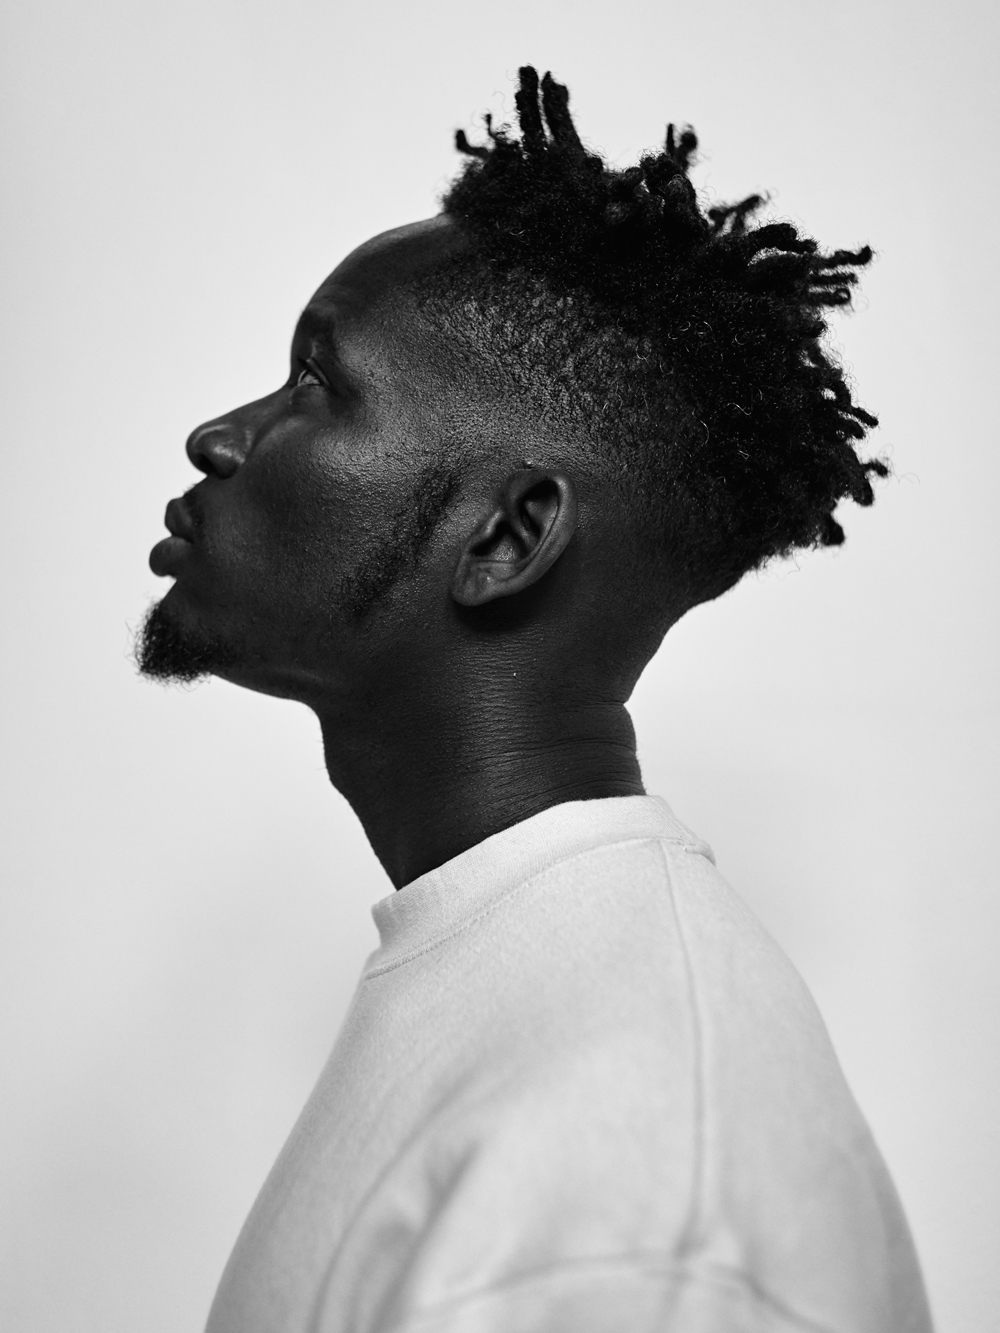 Ghanian superstar Mr Eazi to perform at one of Dubai’s hottest ...